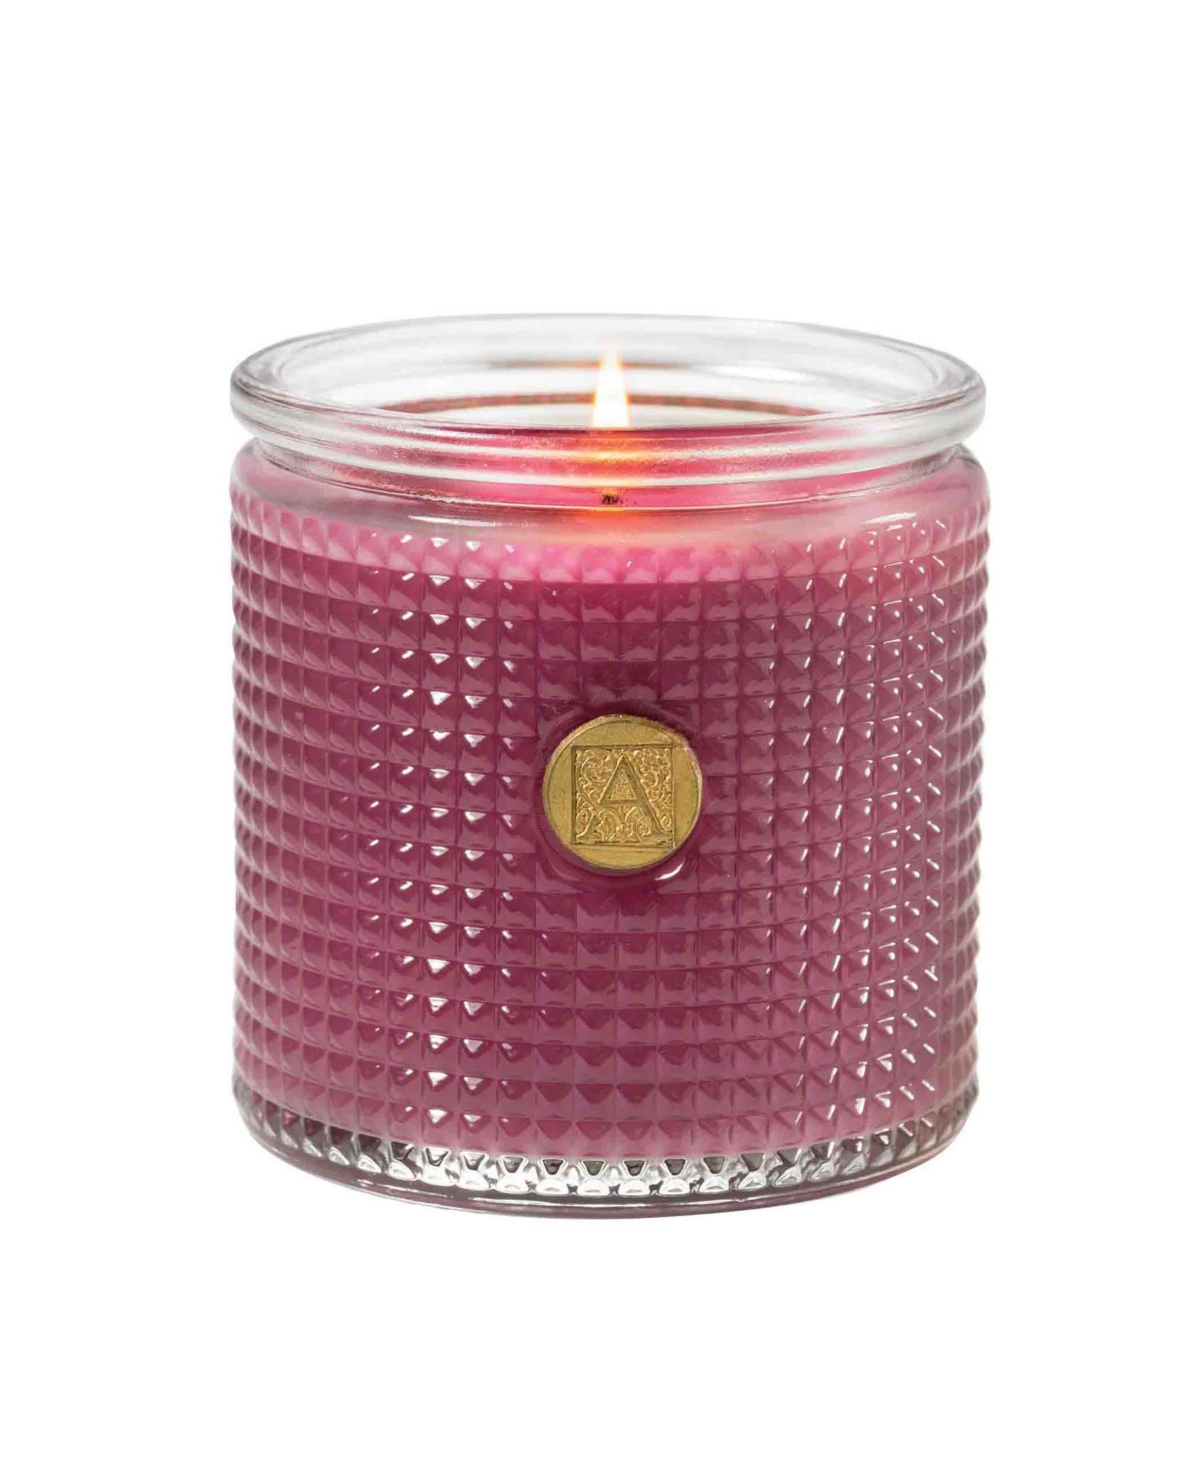 Sparkling Currant Textured Glass Candle - Clear Glass